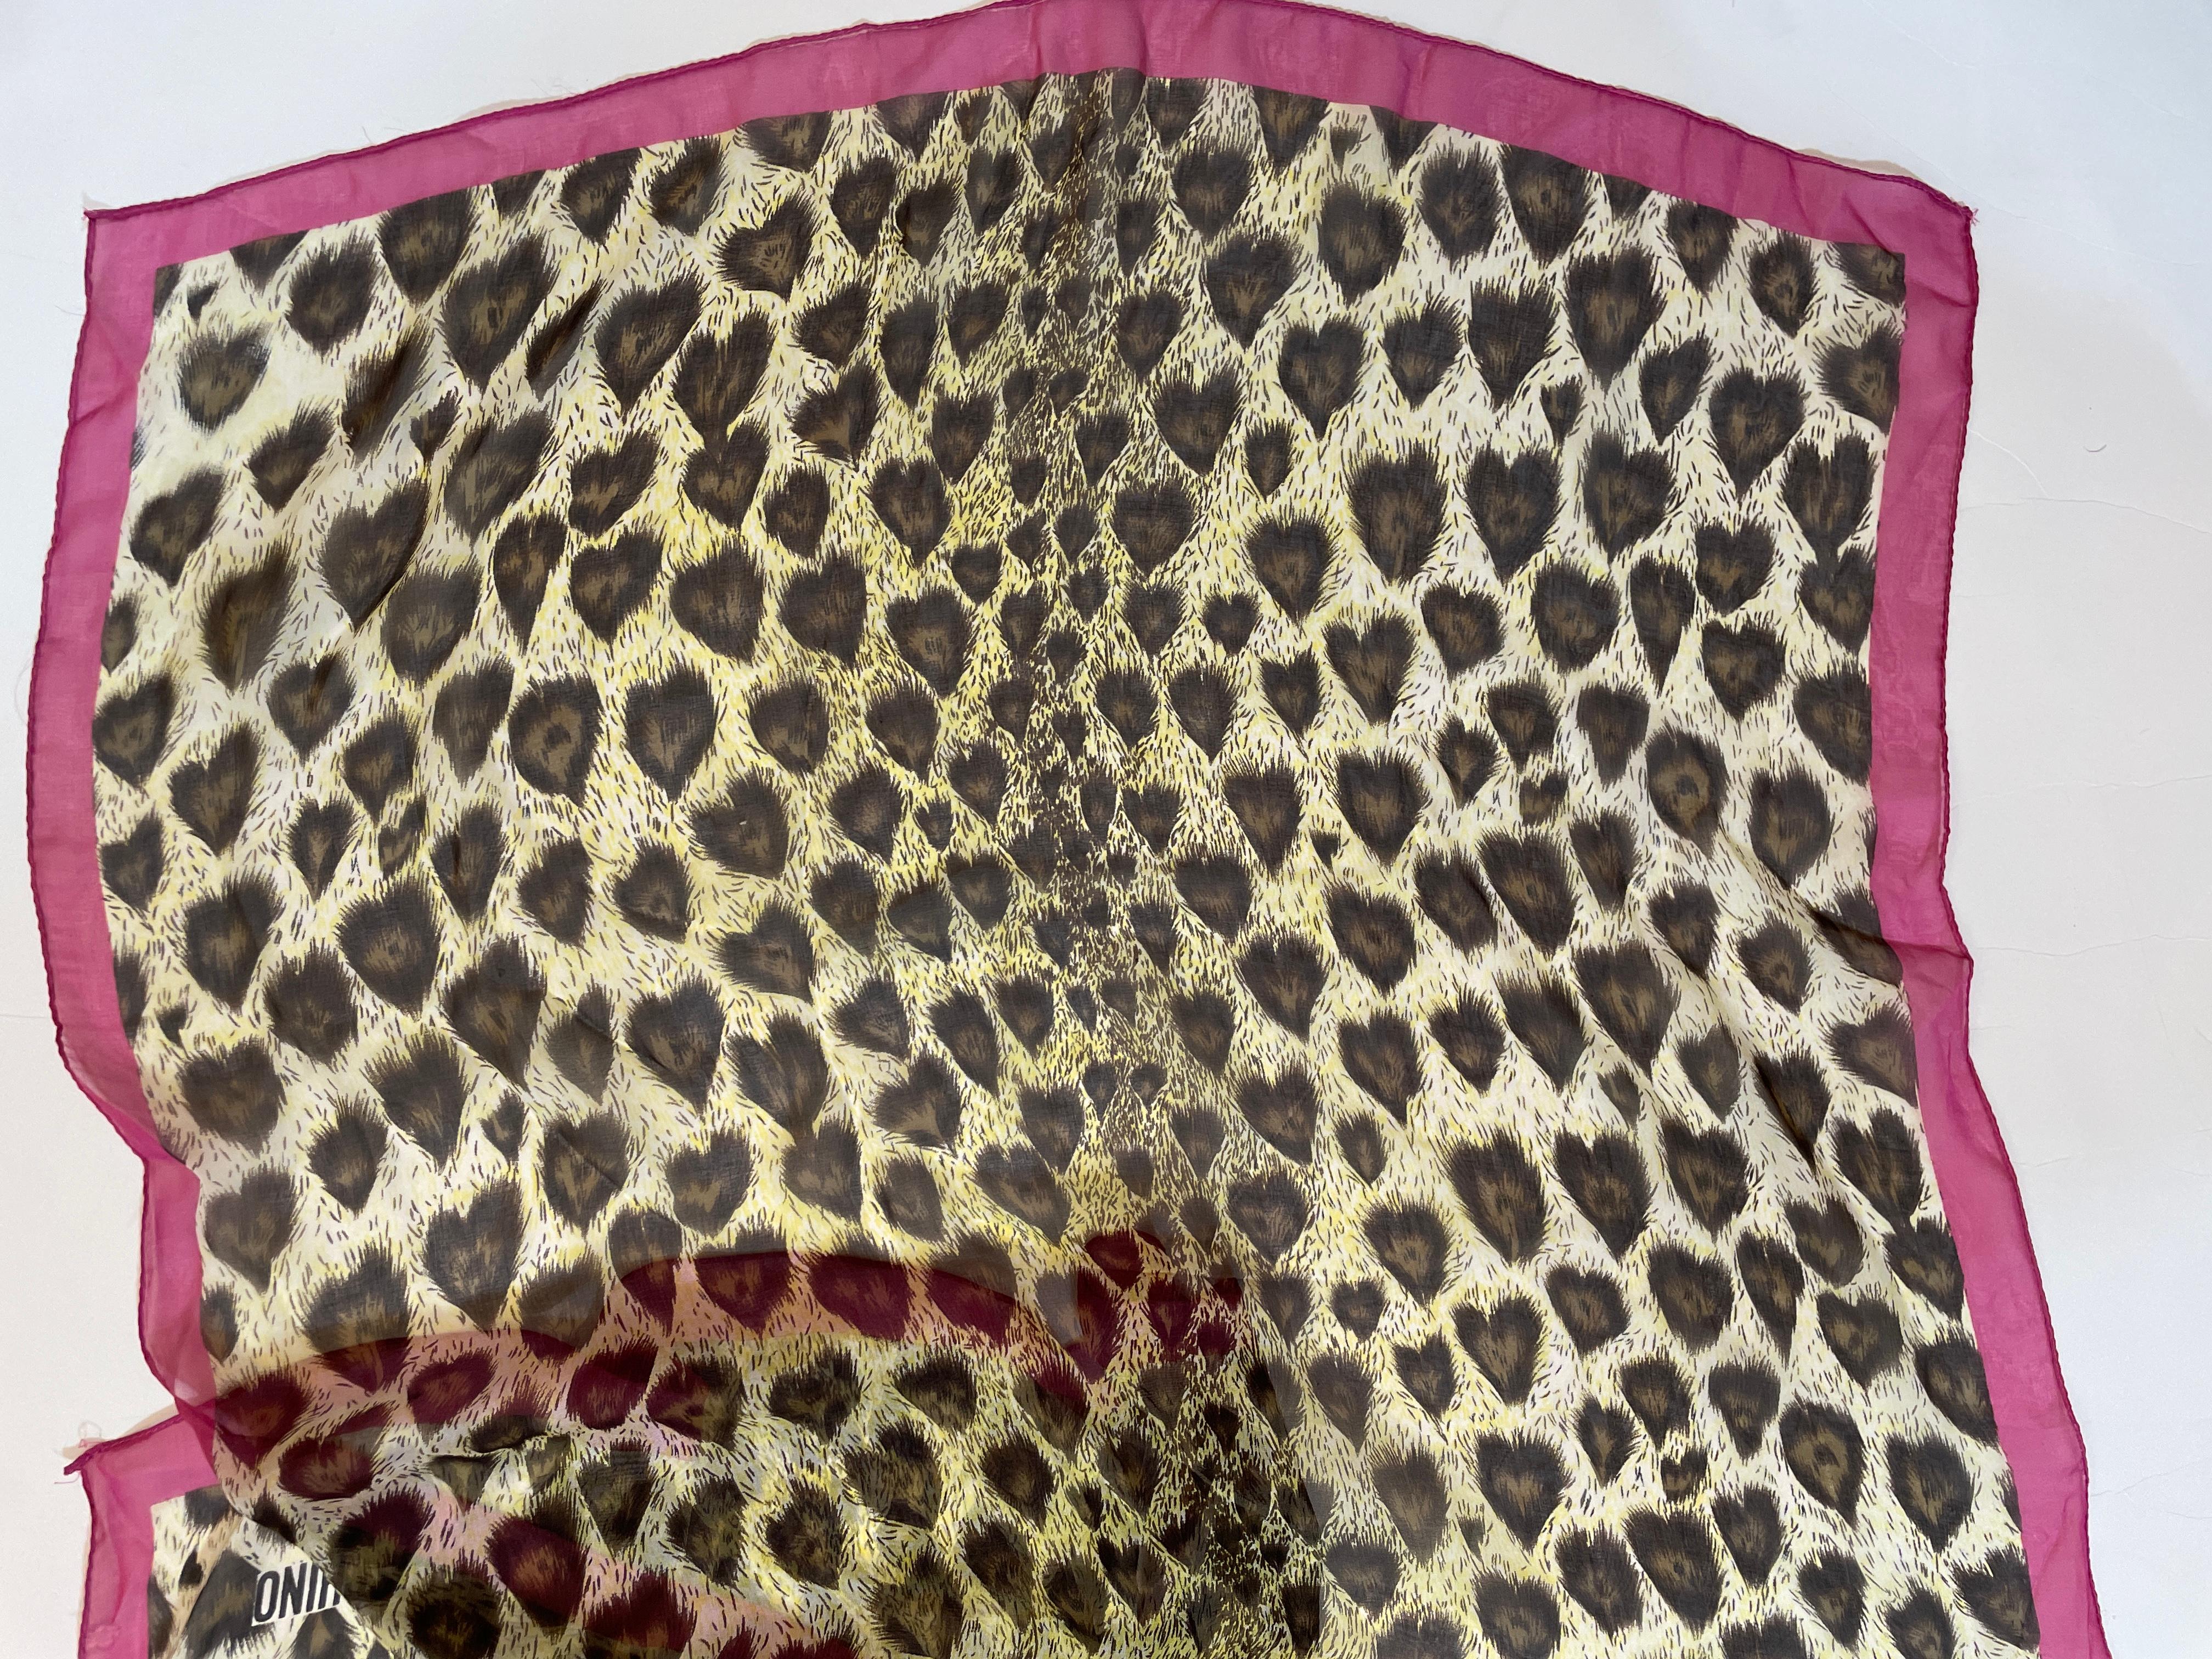 Moschino Animal Print Silk Scarf Made In Italy Pink And Brown 1990s Head Wrap For Sale 6